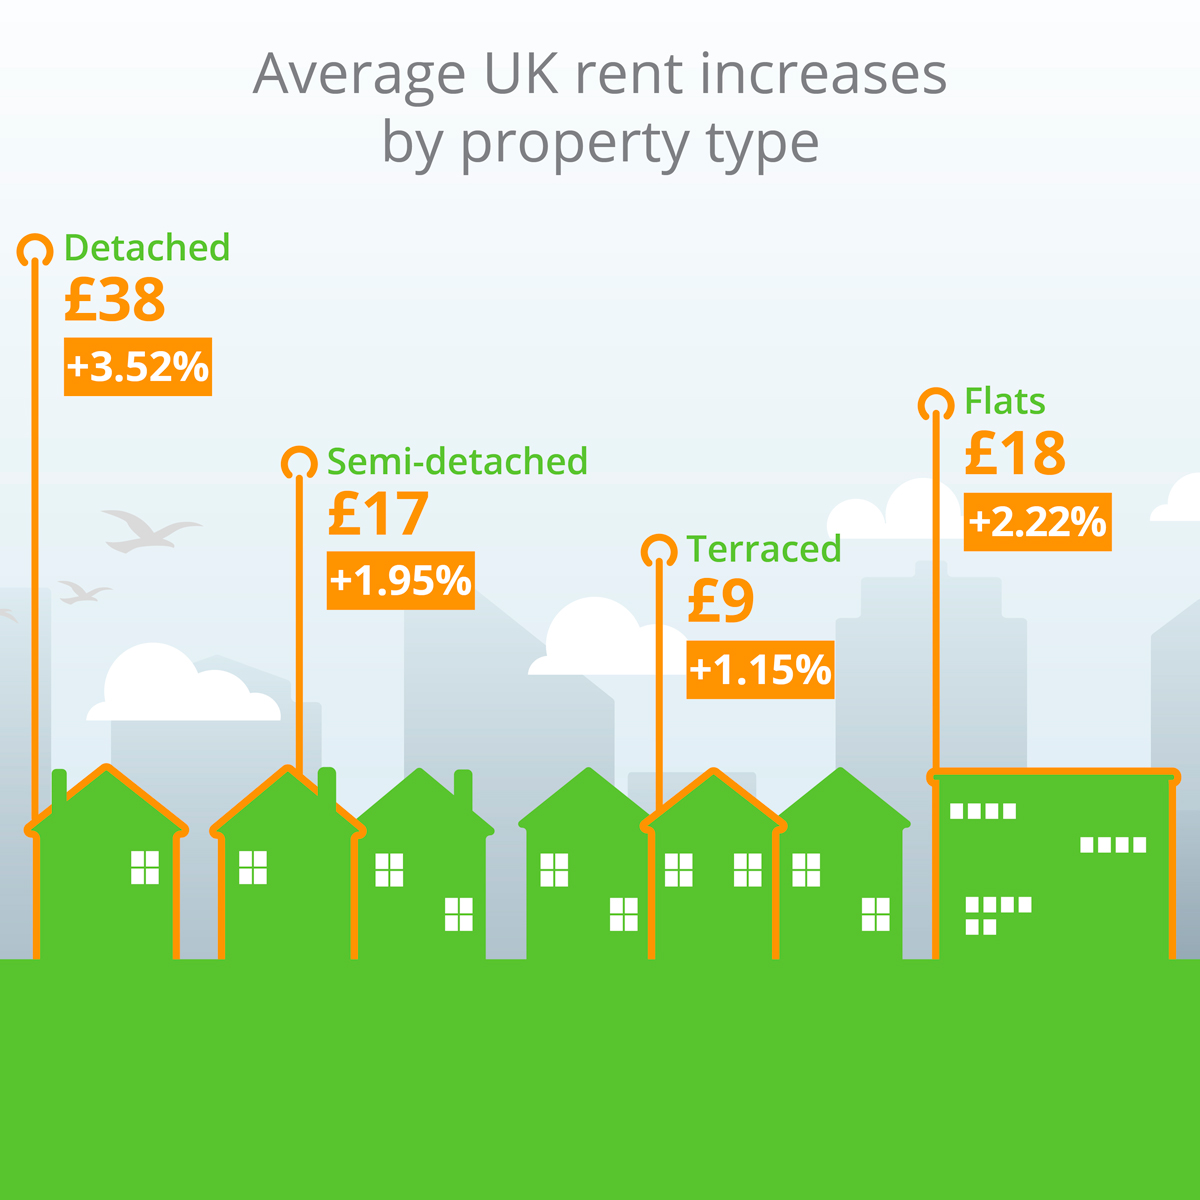 Average UK rent increases by property type